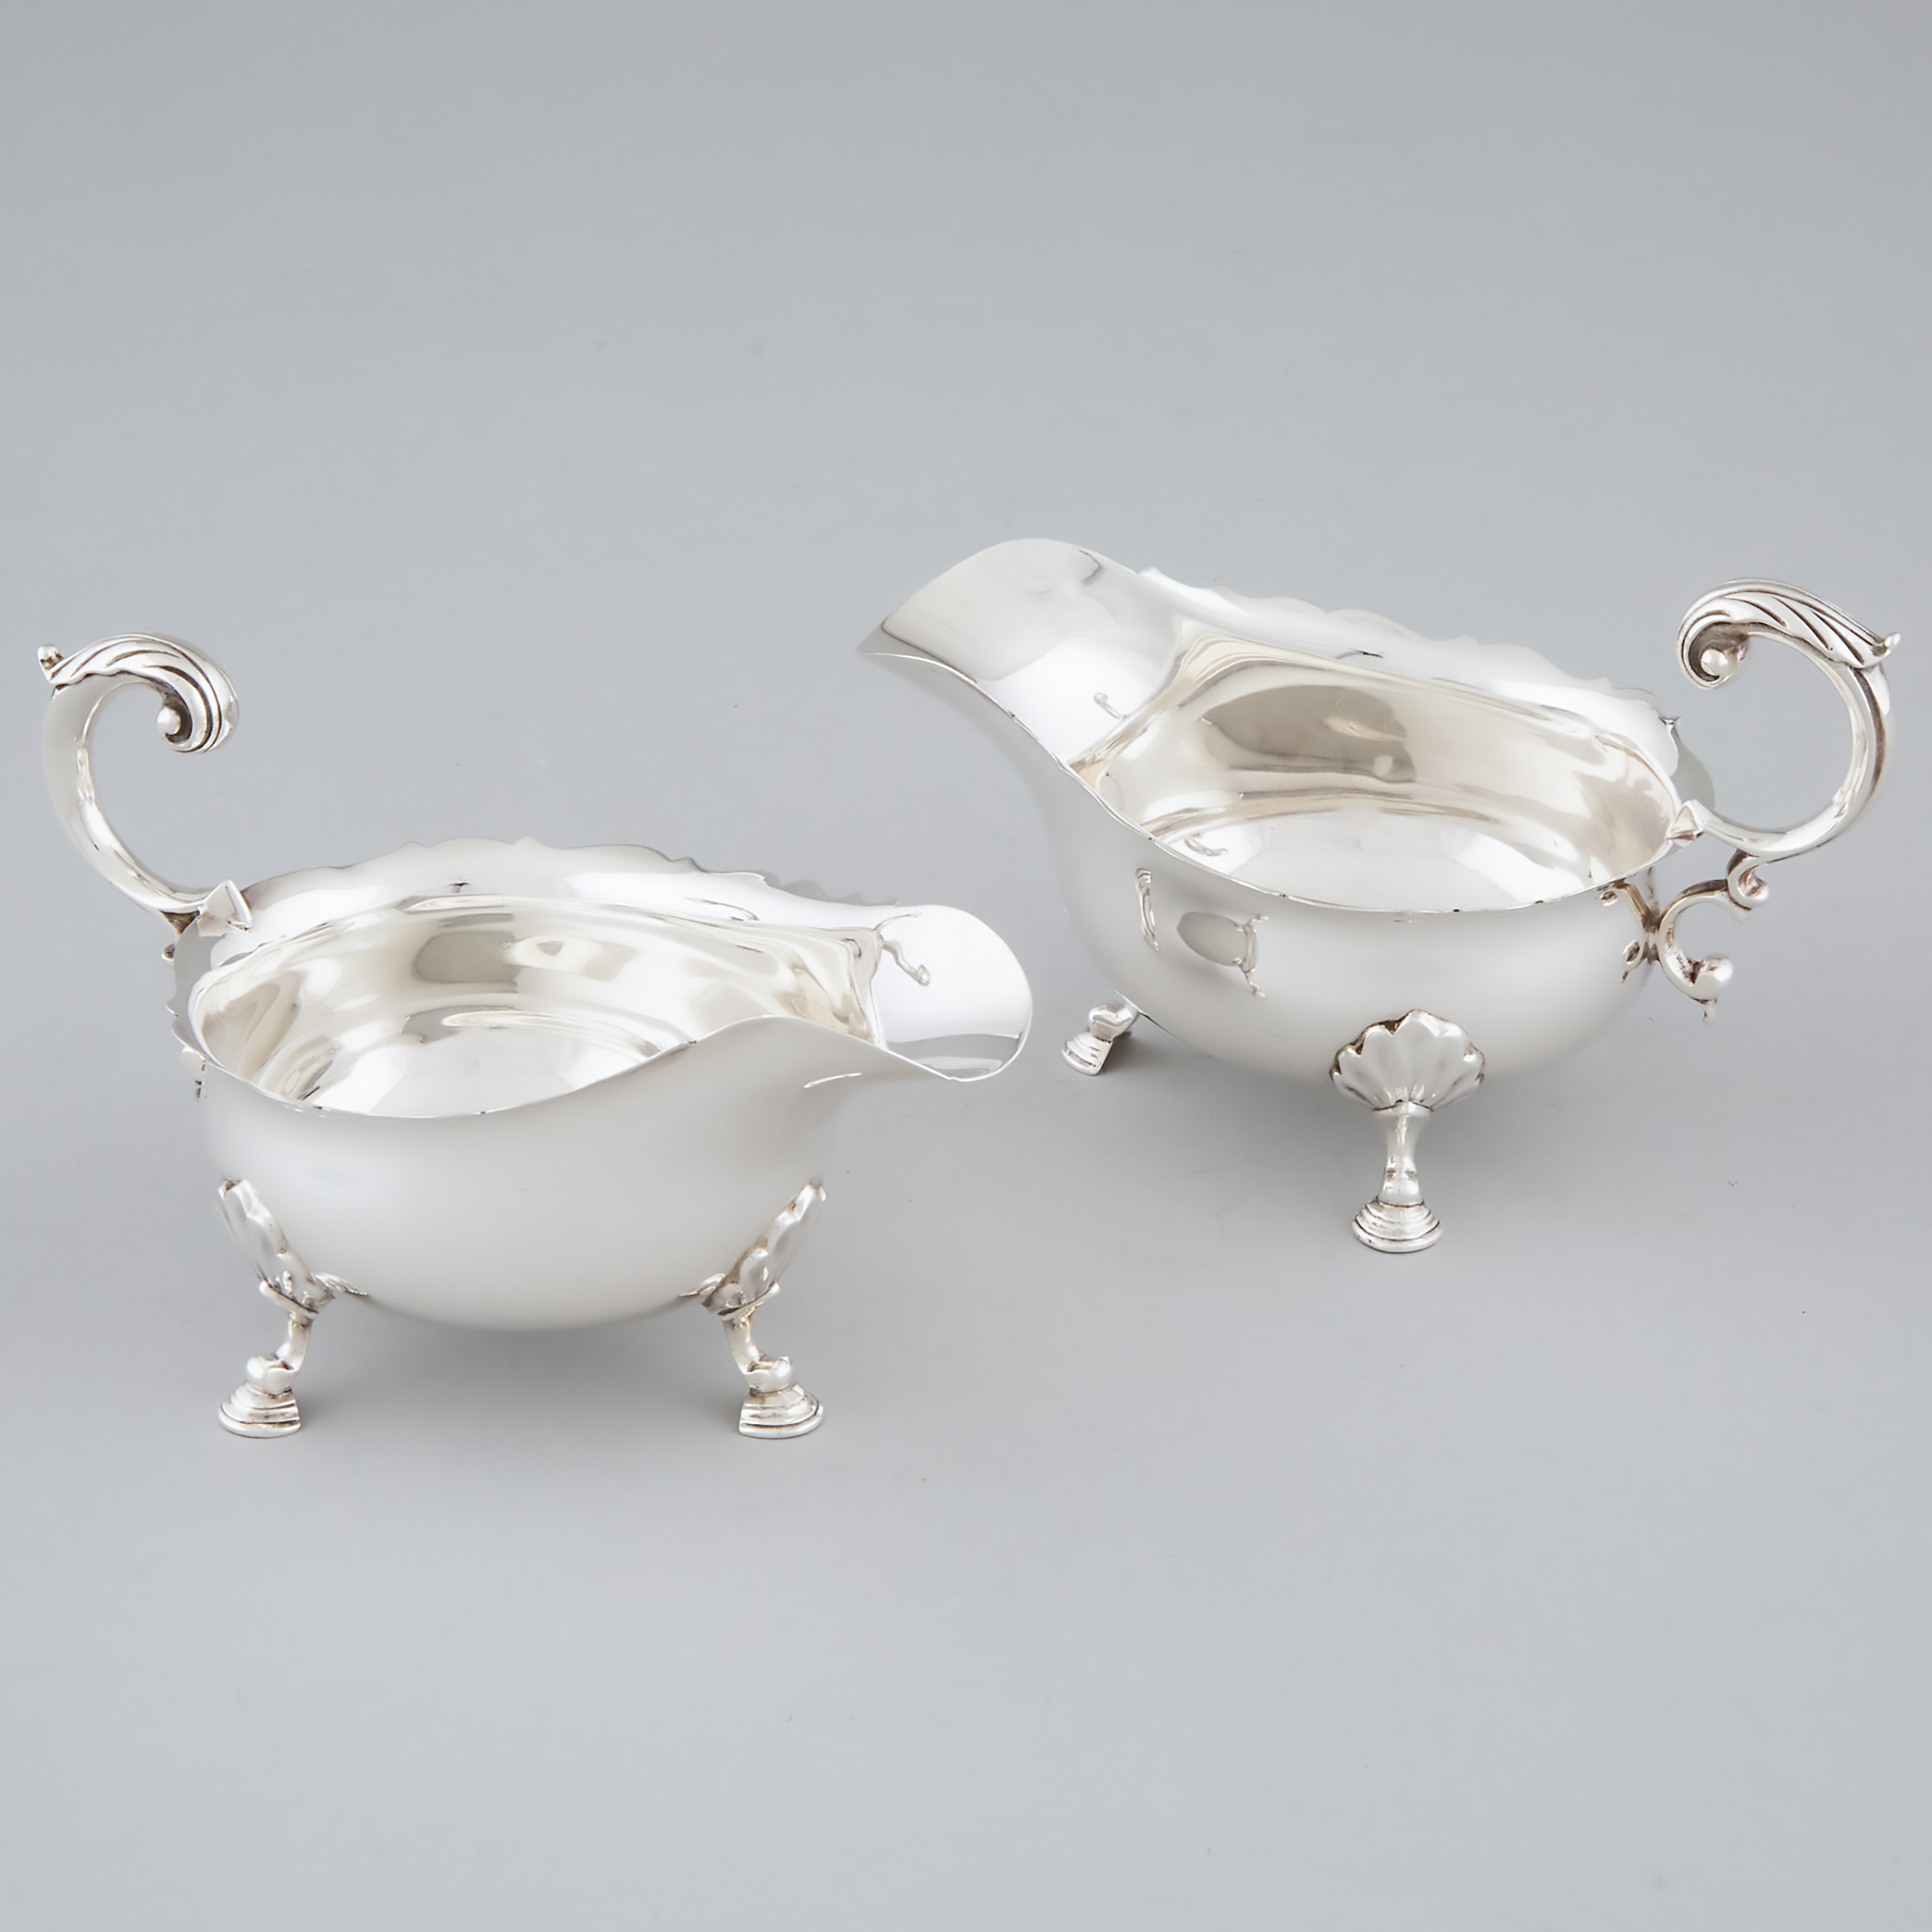 Pair of English Silver Sauce Boats  2a56a8